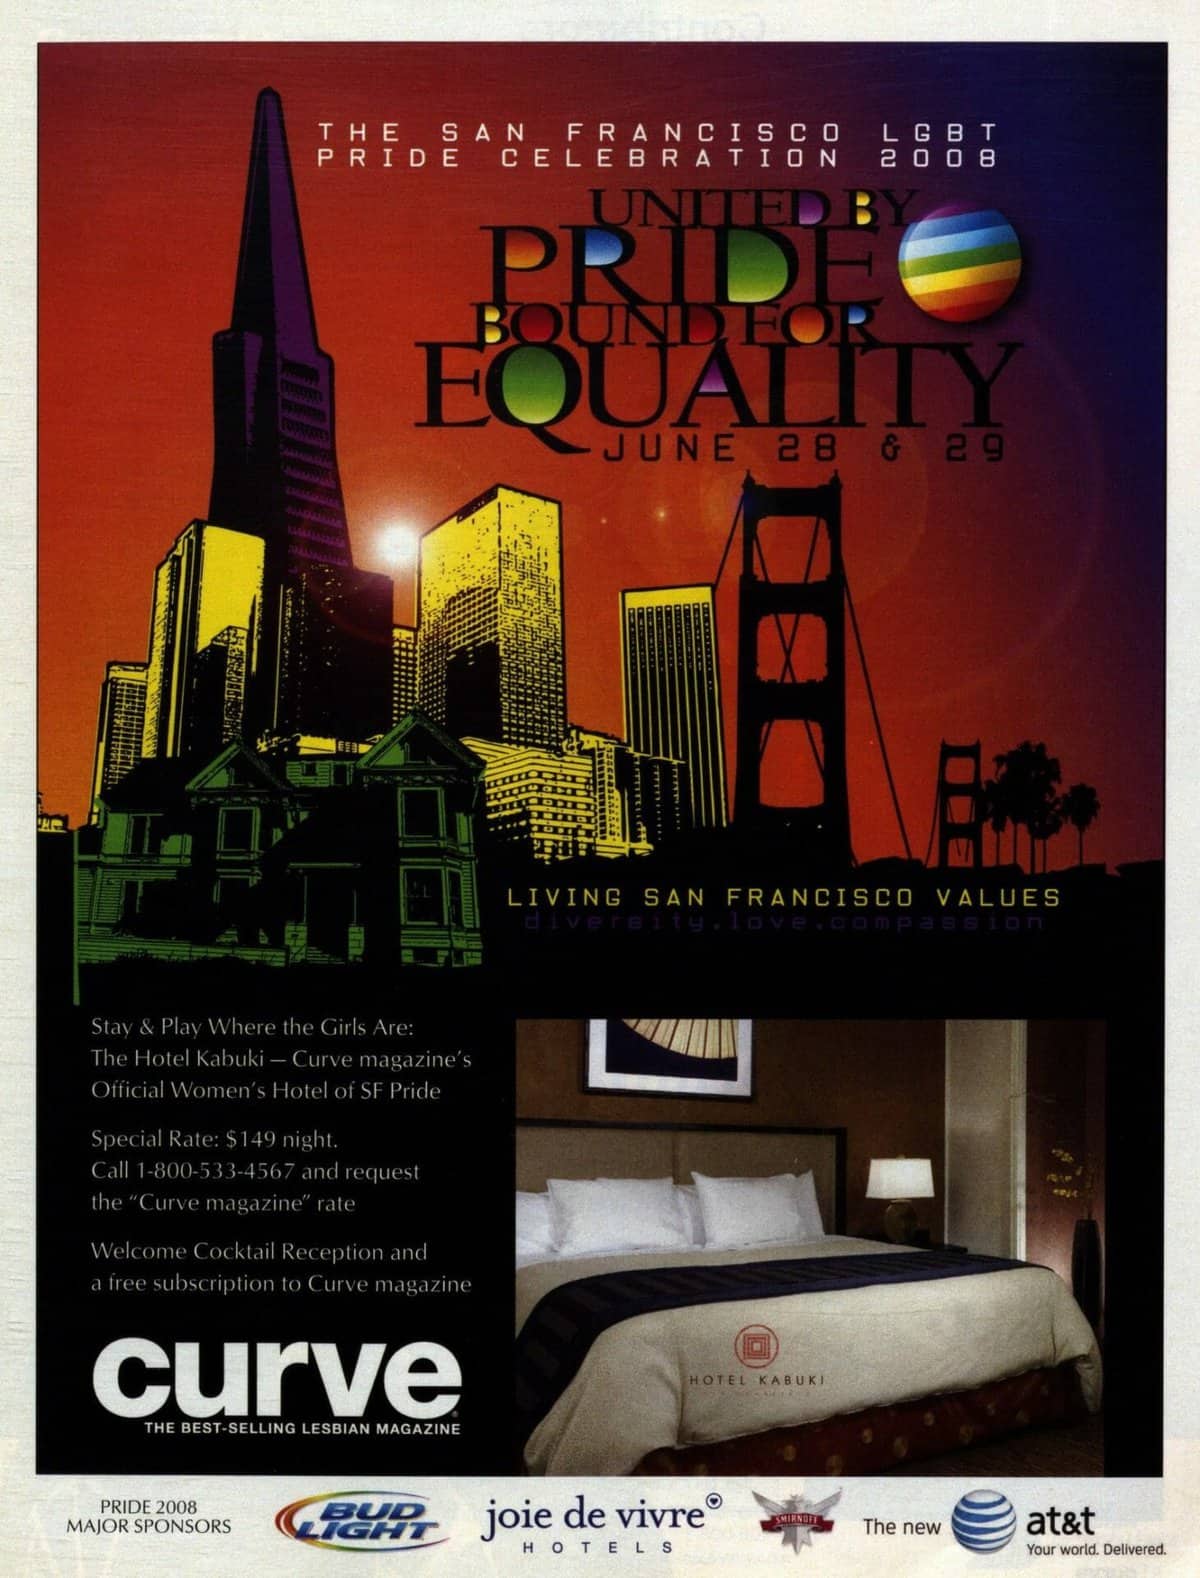 Ahead of the Curve - A documentary about lesbian visibility and Curve  Magazine